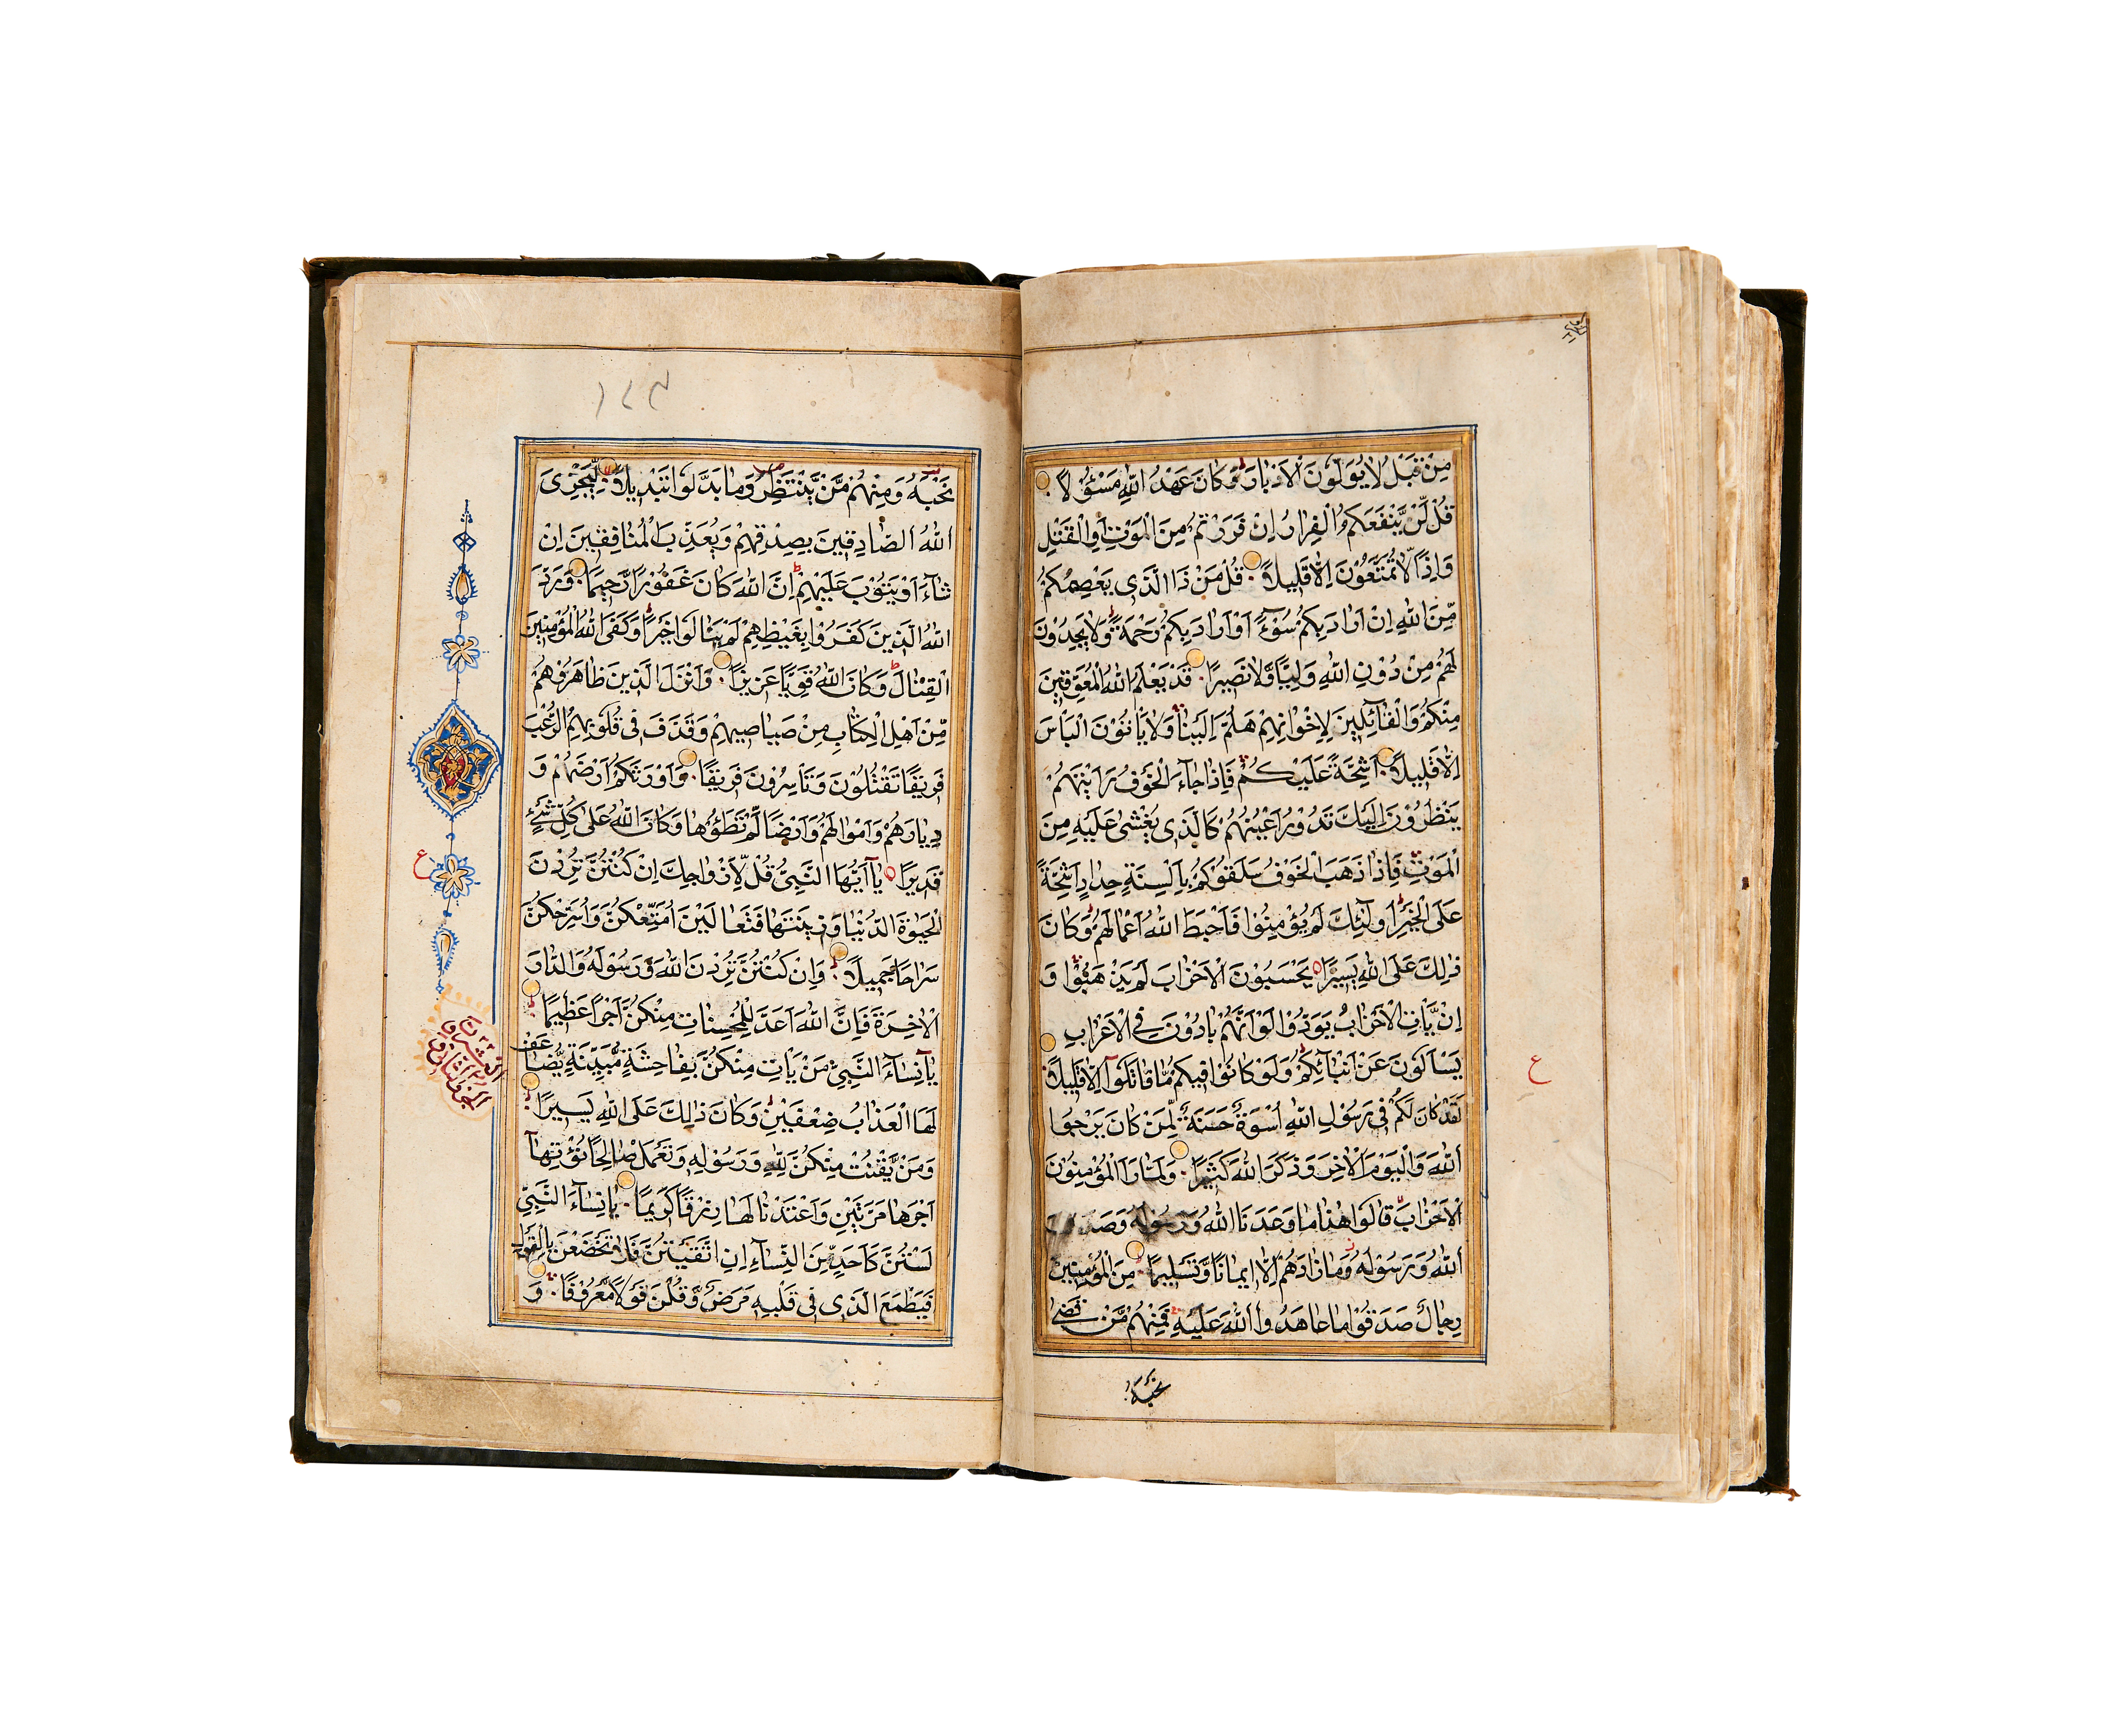 AN ILLUMINATED QUR’AN, NORTH INDIA, KASHMIR, 19TH CENTURY - Image 7 of 10